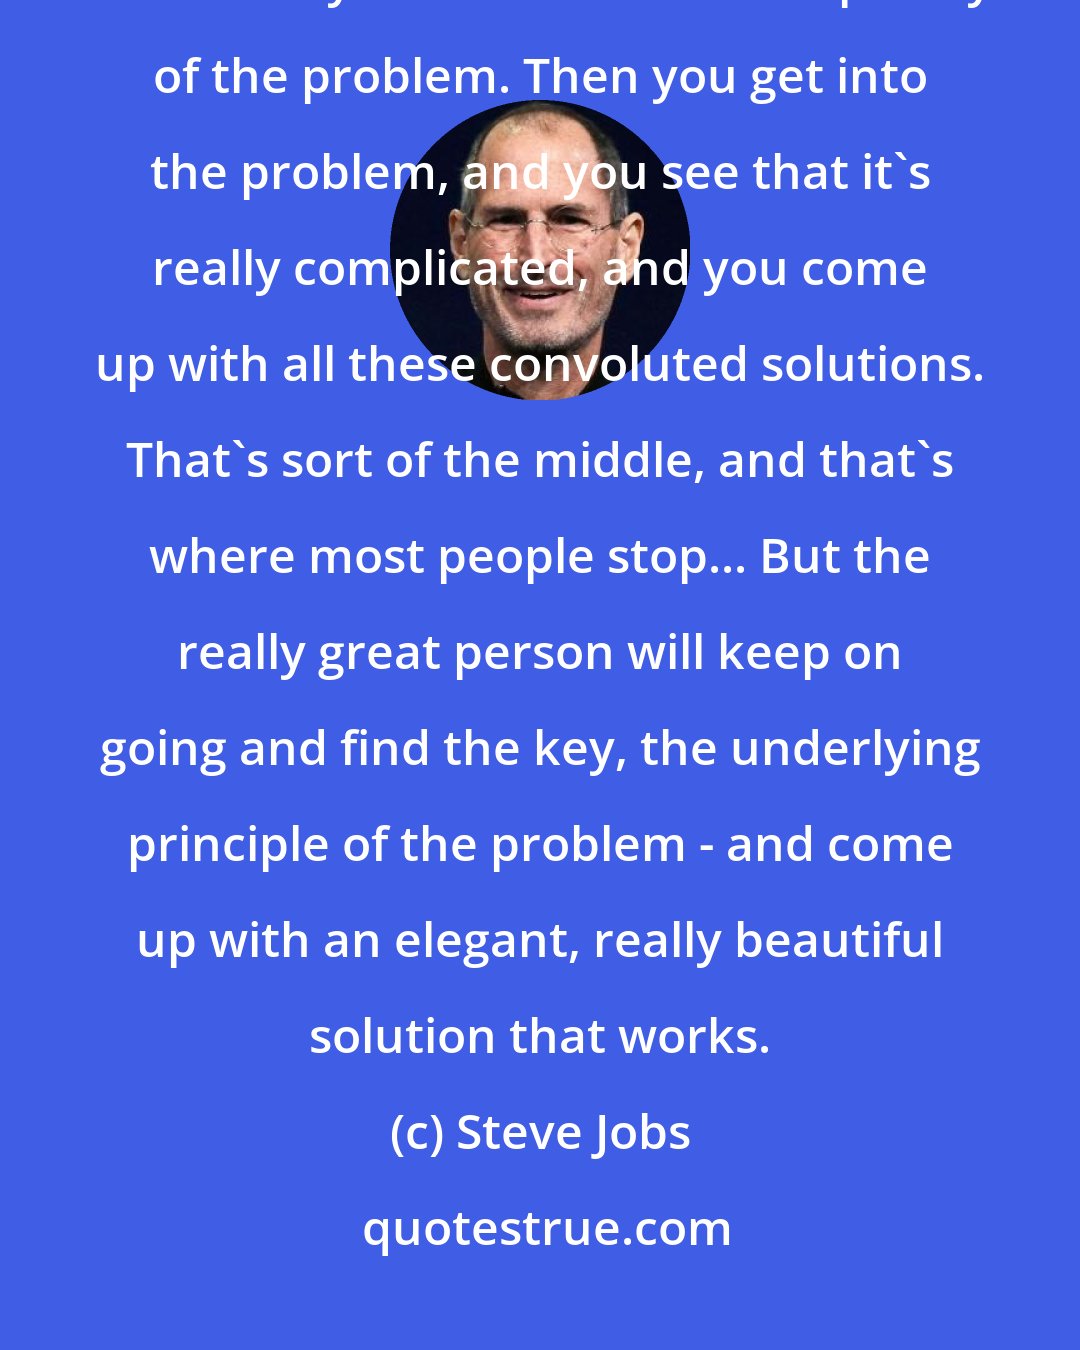 Steve Jobs: When you start looking at a problem and it seems really simple, you don't really understand the complexity of the problem. Then you get into the problem, and you see that it's really complicated, and you come up with all these convoluted solutions. That's sort of the middle, and that's where most people stop... But the really great person will keep on going and find the key, the underlying principle of the problem - and come up with an elegant, really beautiful solution that works.